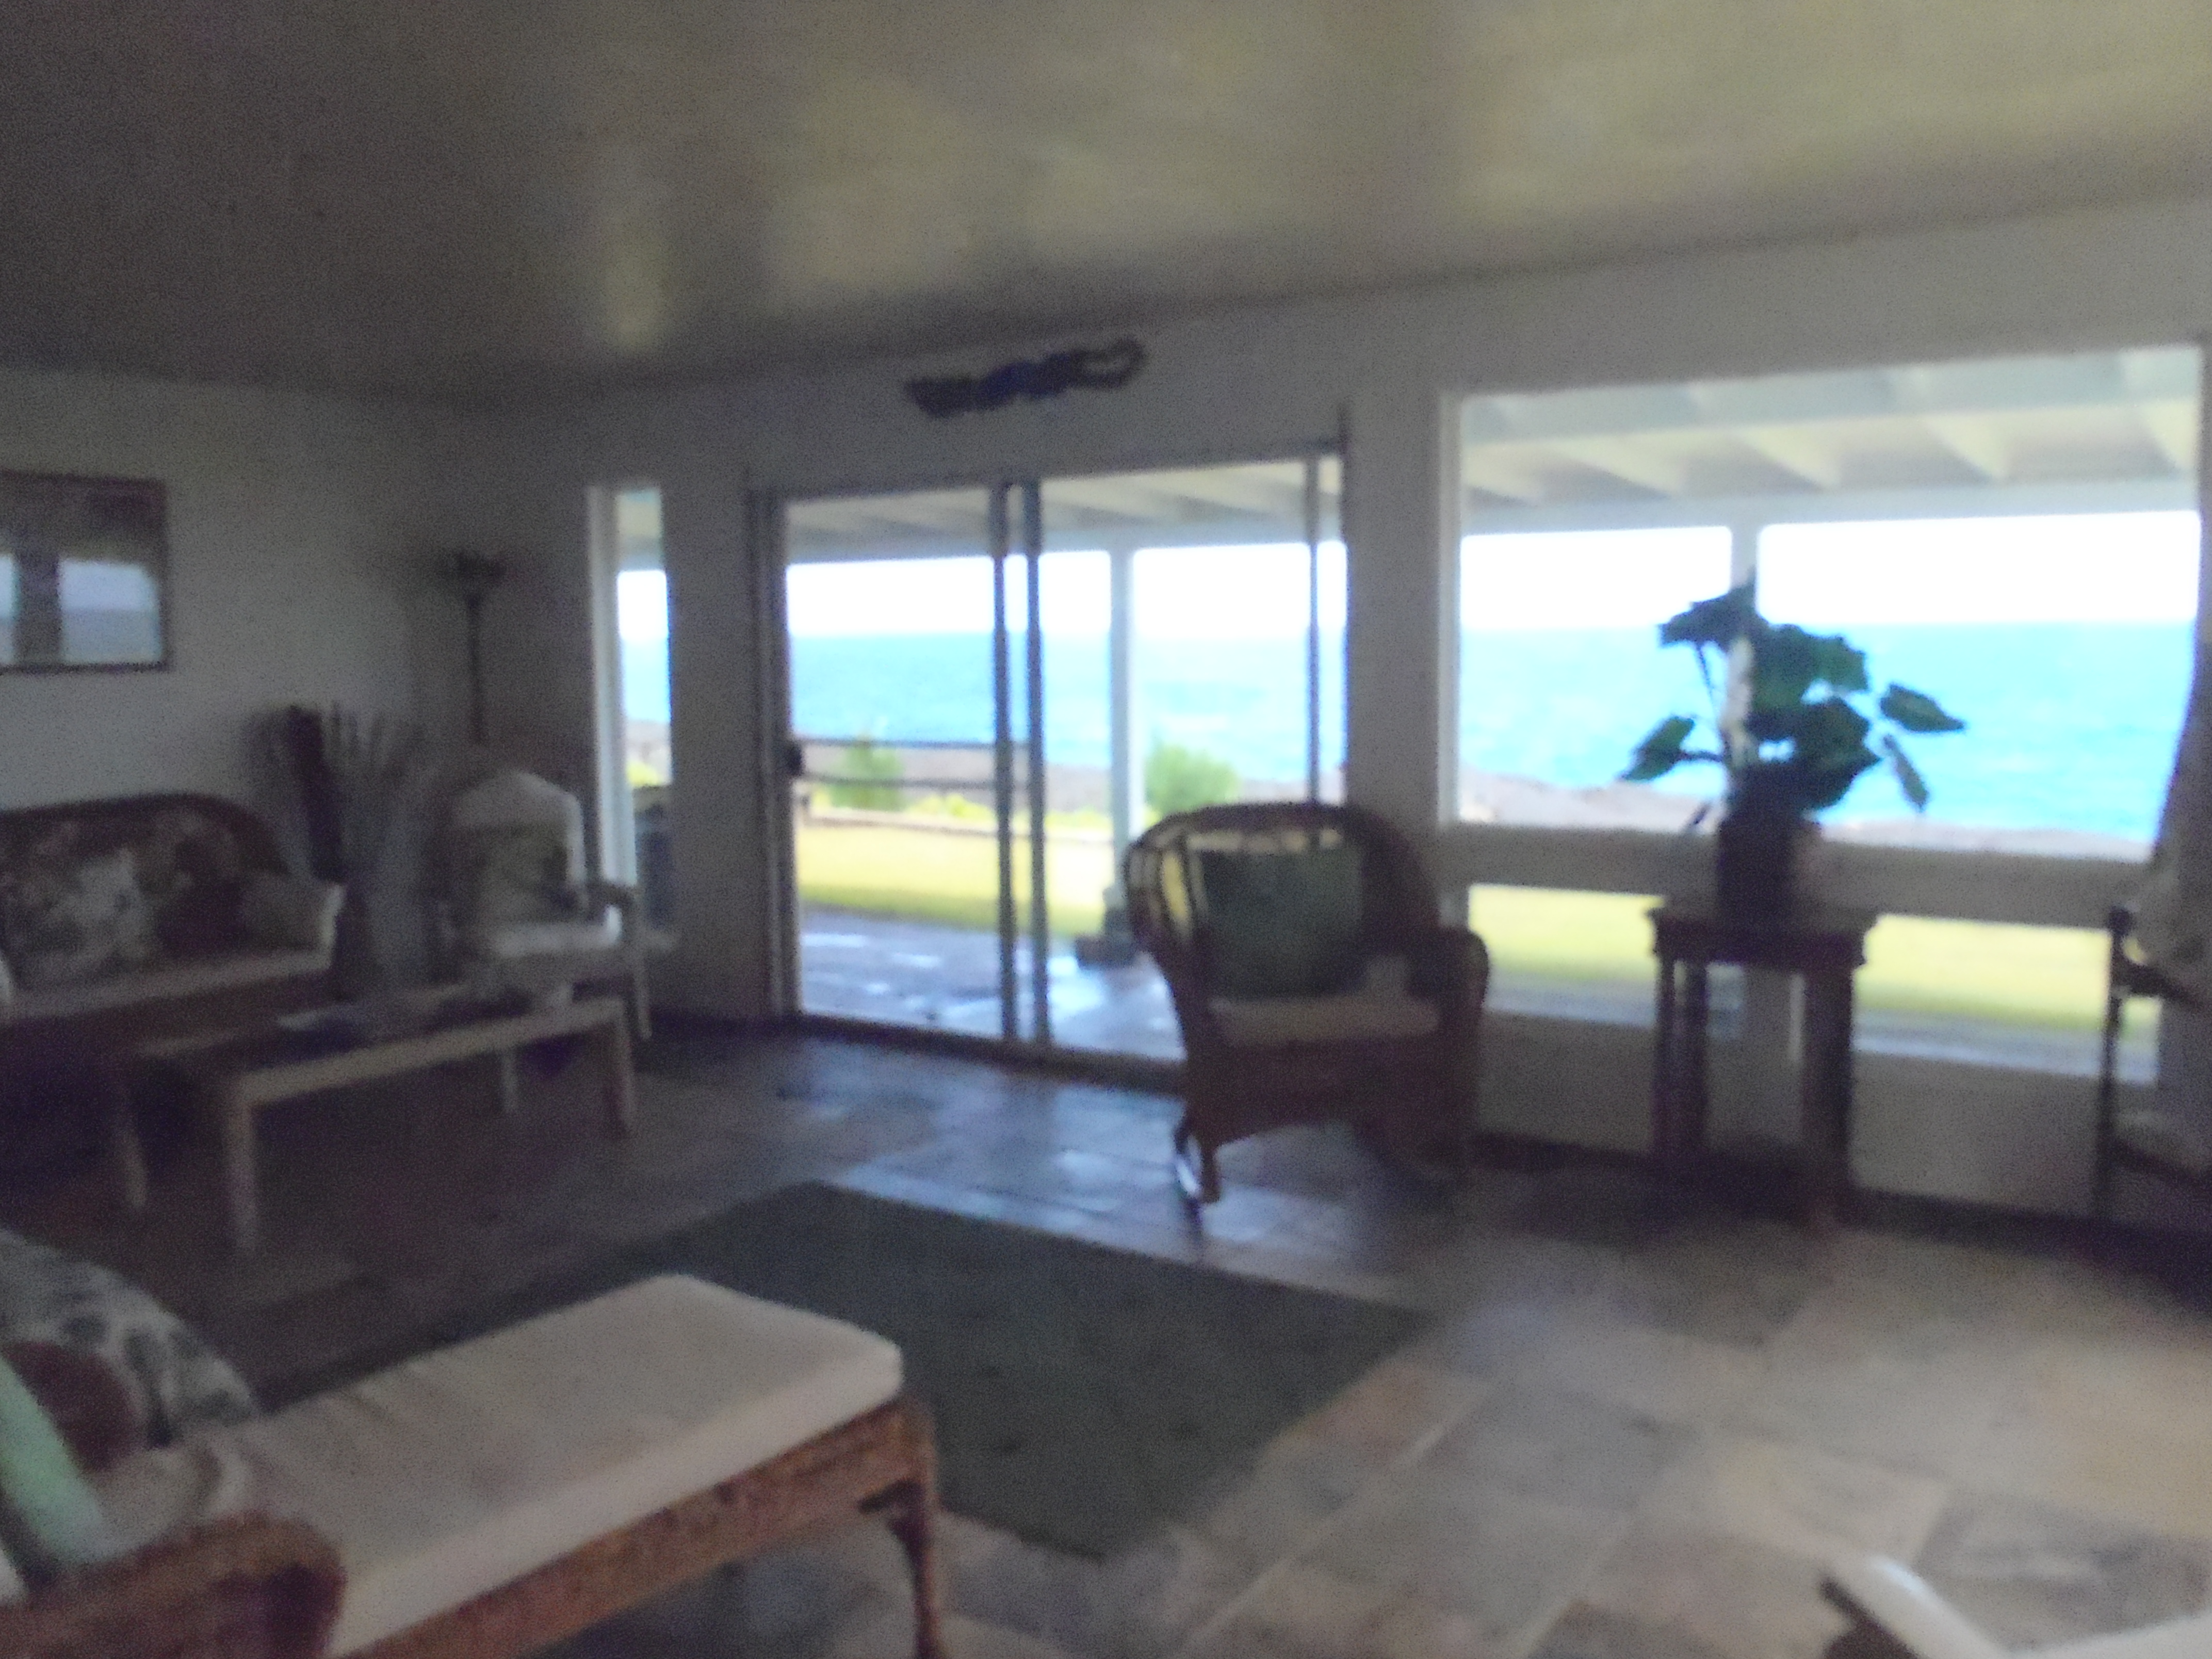 Oceantfront Alohahouse – WOW factor – live on the Edge of the Pacific Ocean!